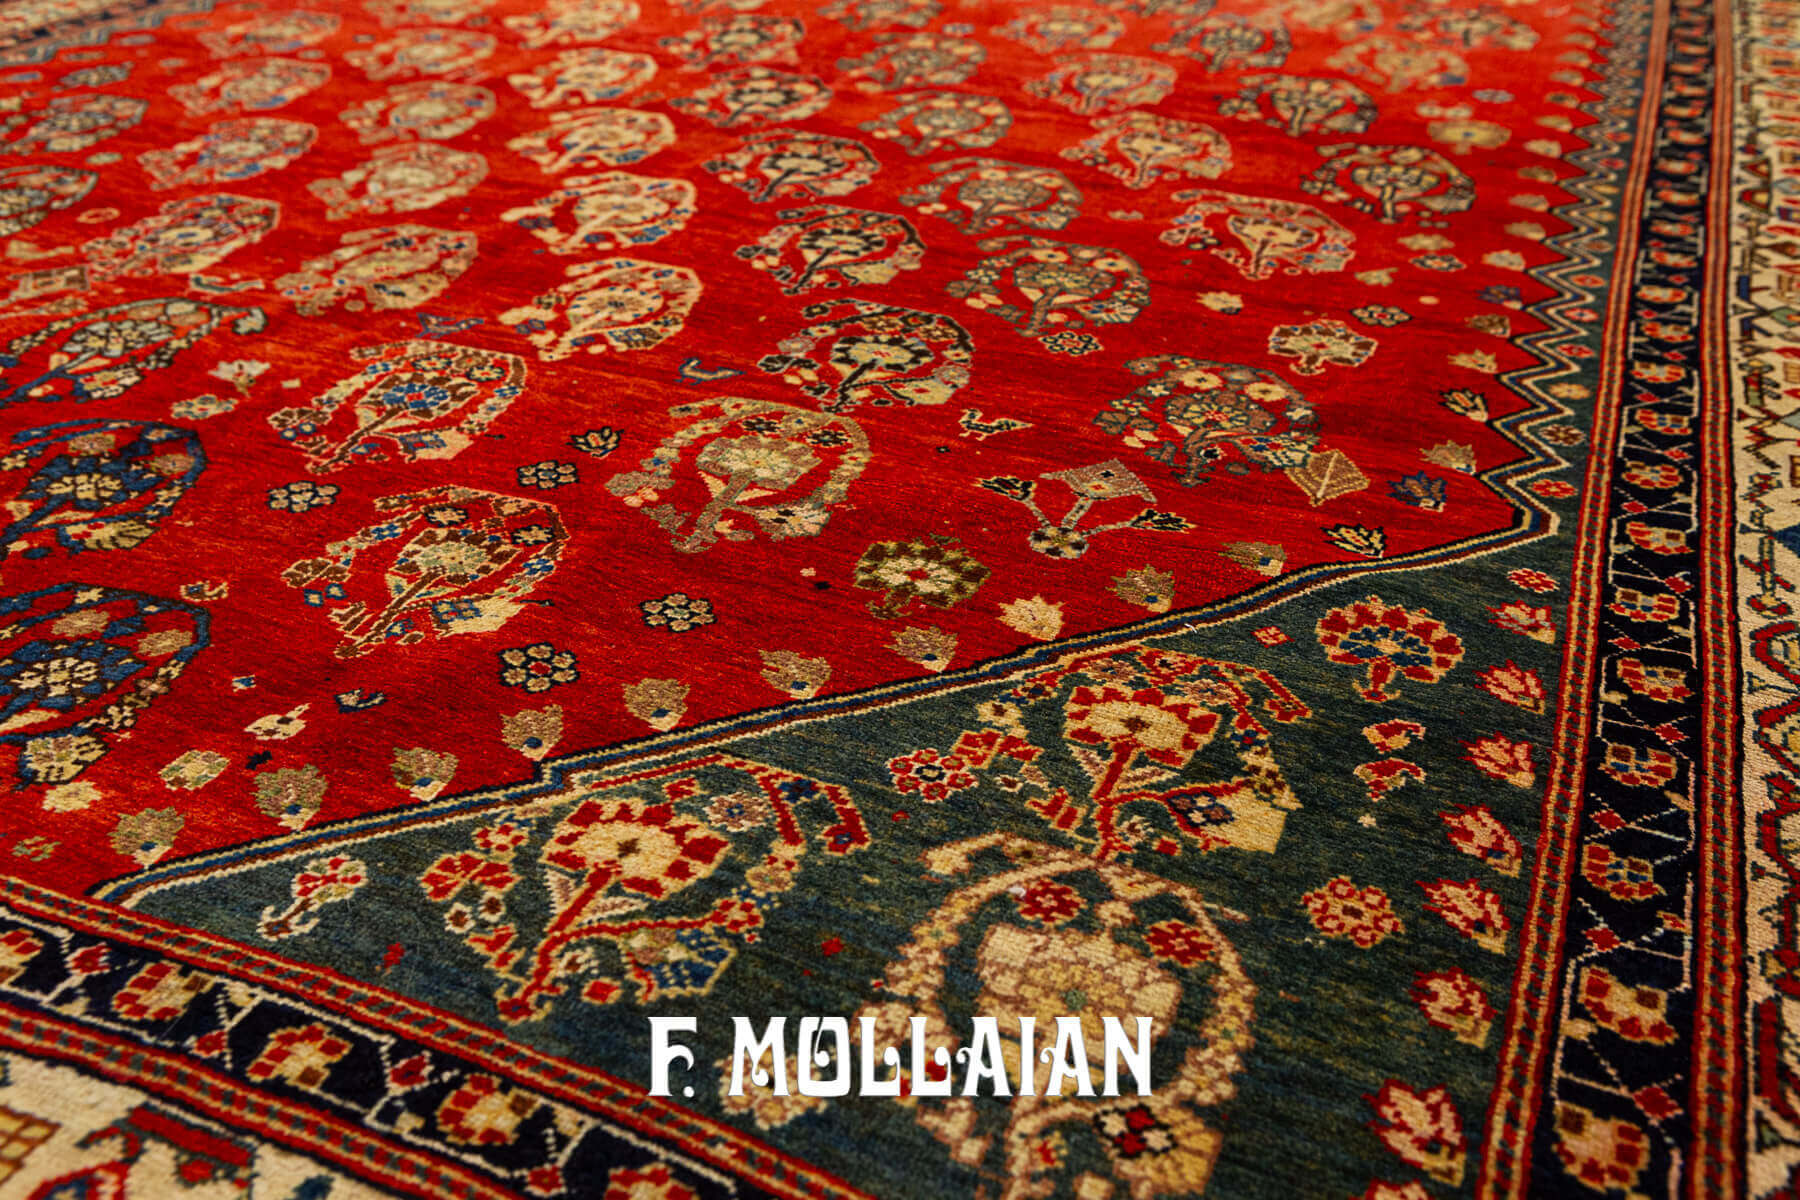 All-over (Moharammat design) with Wide Gallery (kalleh) Size Hand-knotted Antique Persian Kashkuli Carpet n°:96133719